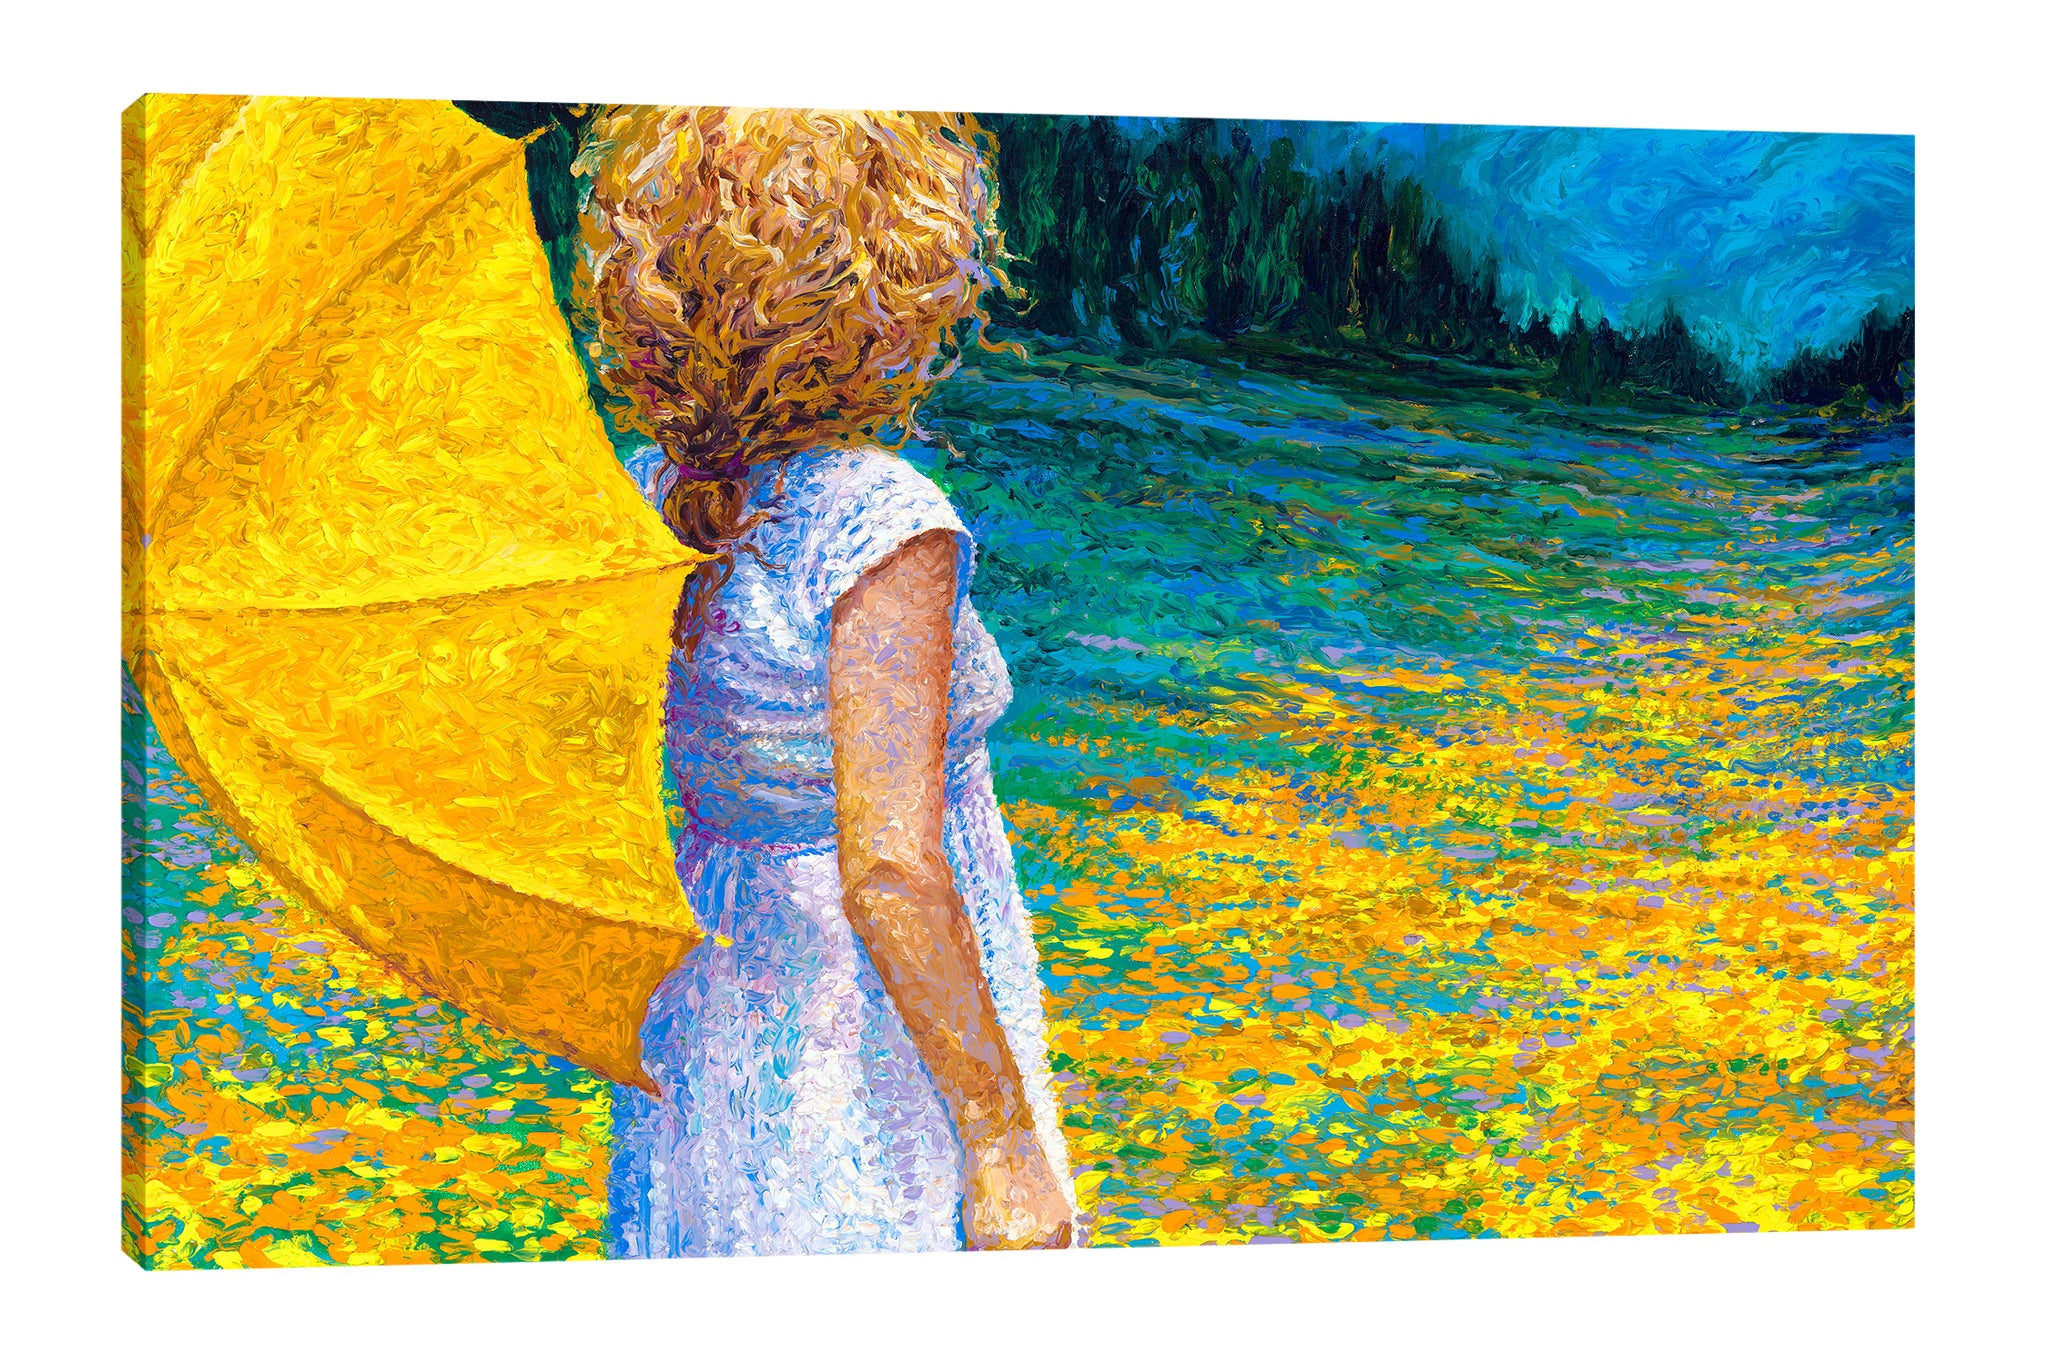 Iris-Scott,Modern & Contemporary,People,woman,women,lady,yellow,umbrella,florals,flowers,trees,forests,